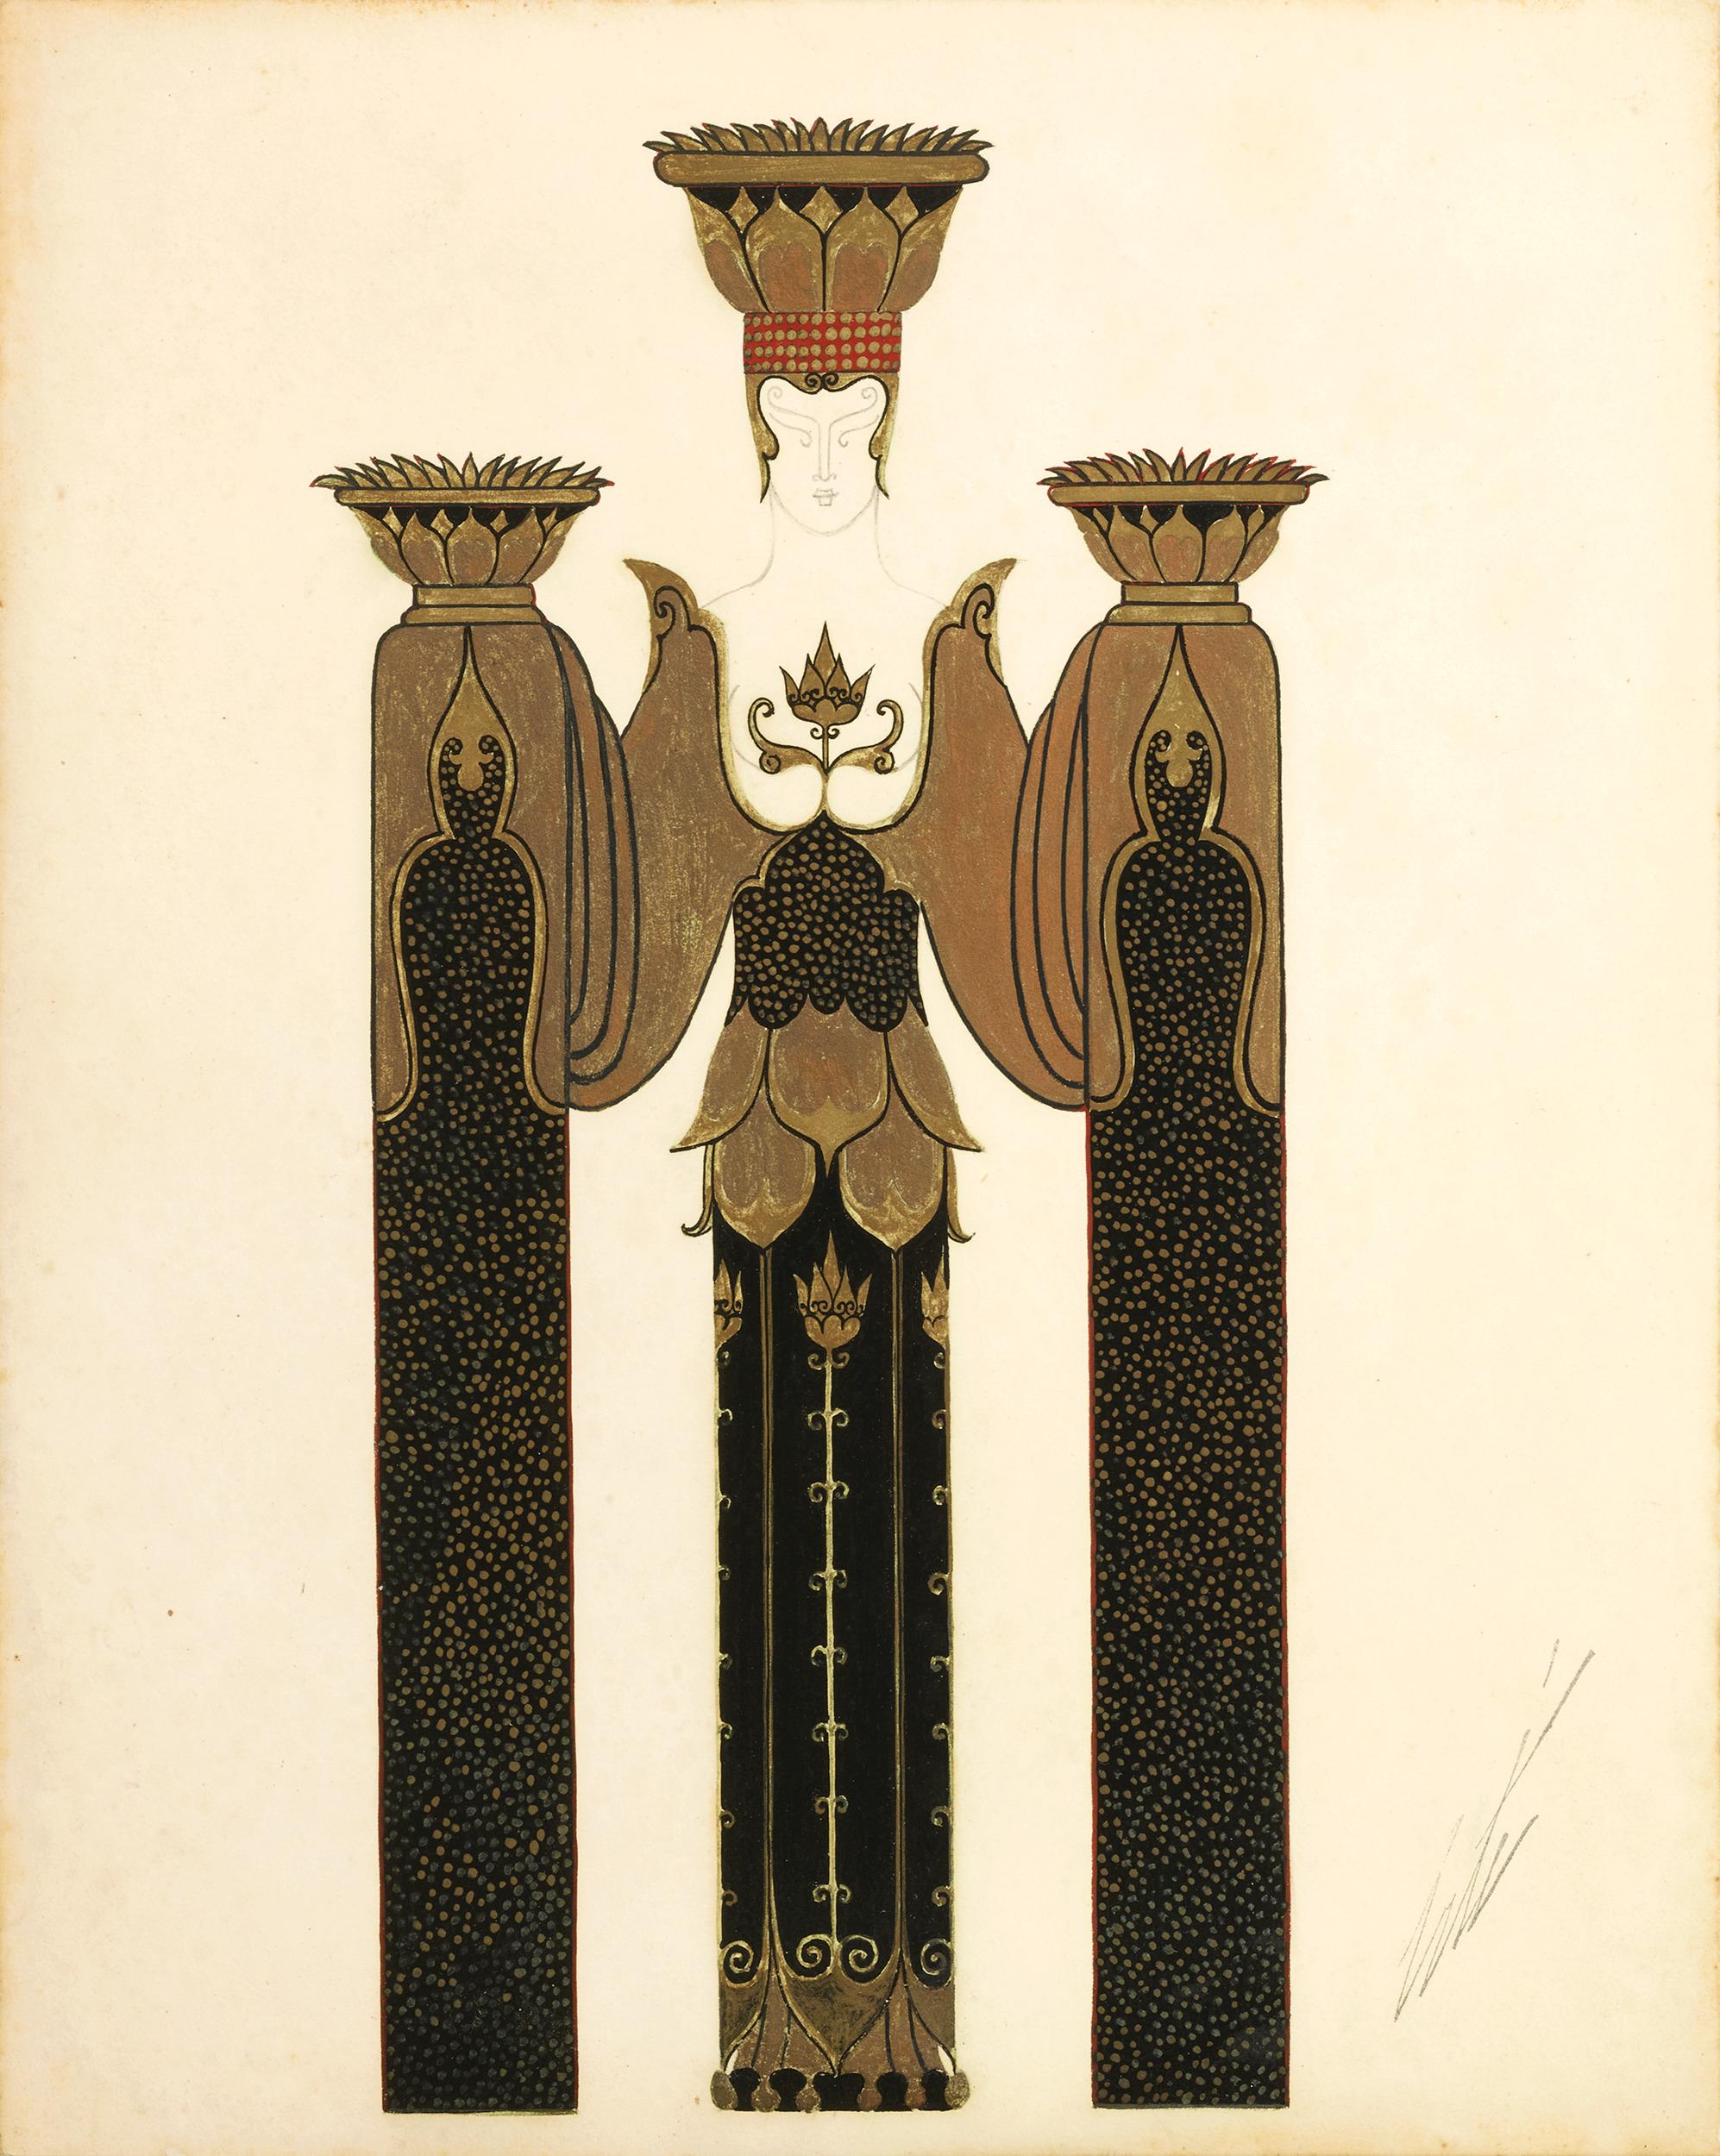 Erté (Romain de Tirtoff)
1892-1990 | Russian-French

Salade de fleurs de lotus
(Lotus Flower Salad)

Inscribed “n°1.497” (en verso)
Gouache on paper

In 1929, Erté embarked on the creative journey of designing stage settings and costumes for Aladin,